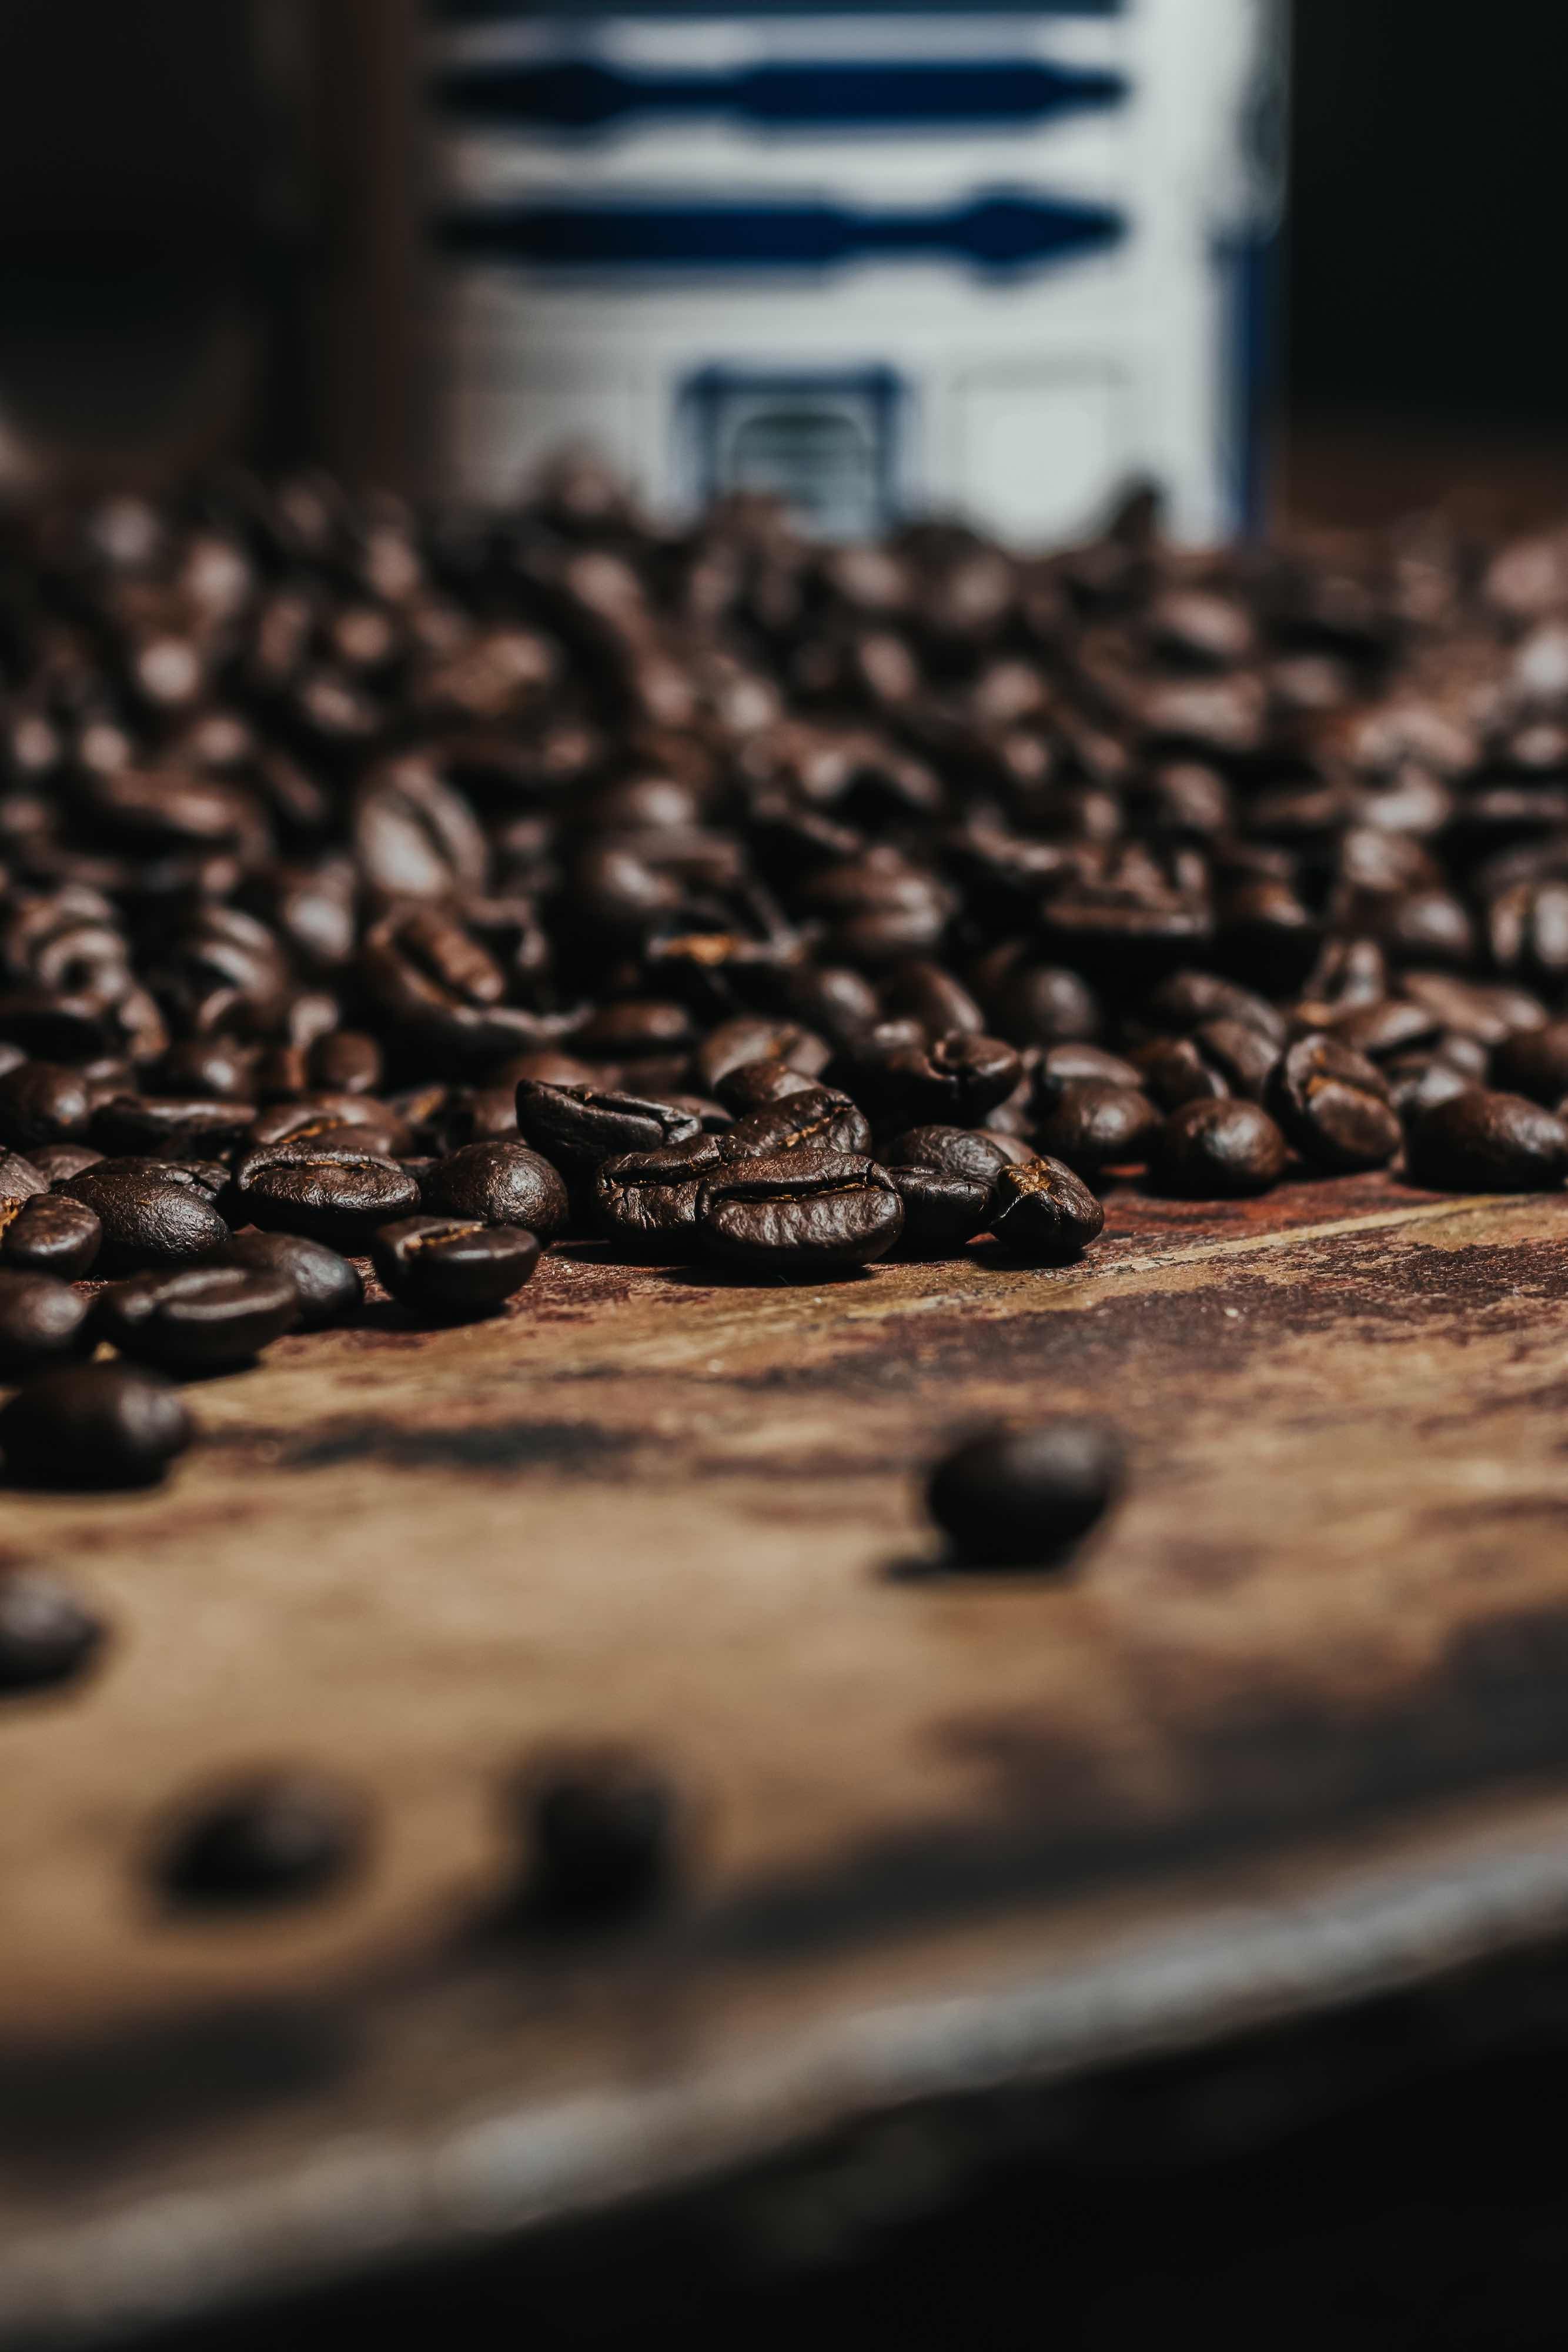 A pile of coffee beans near the edge of a dark wooden countertop.